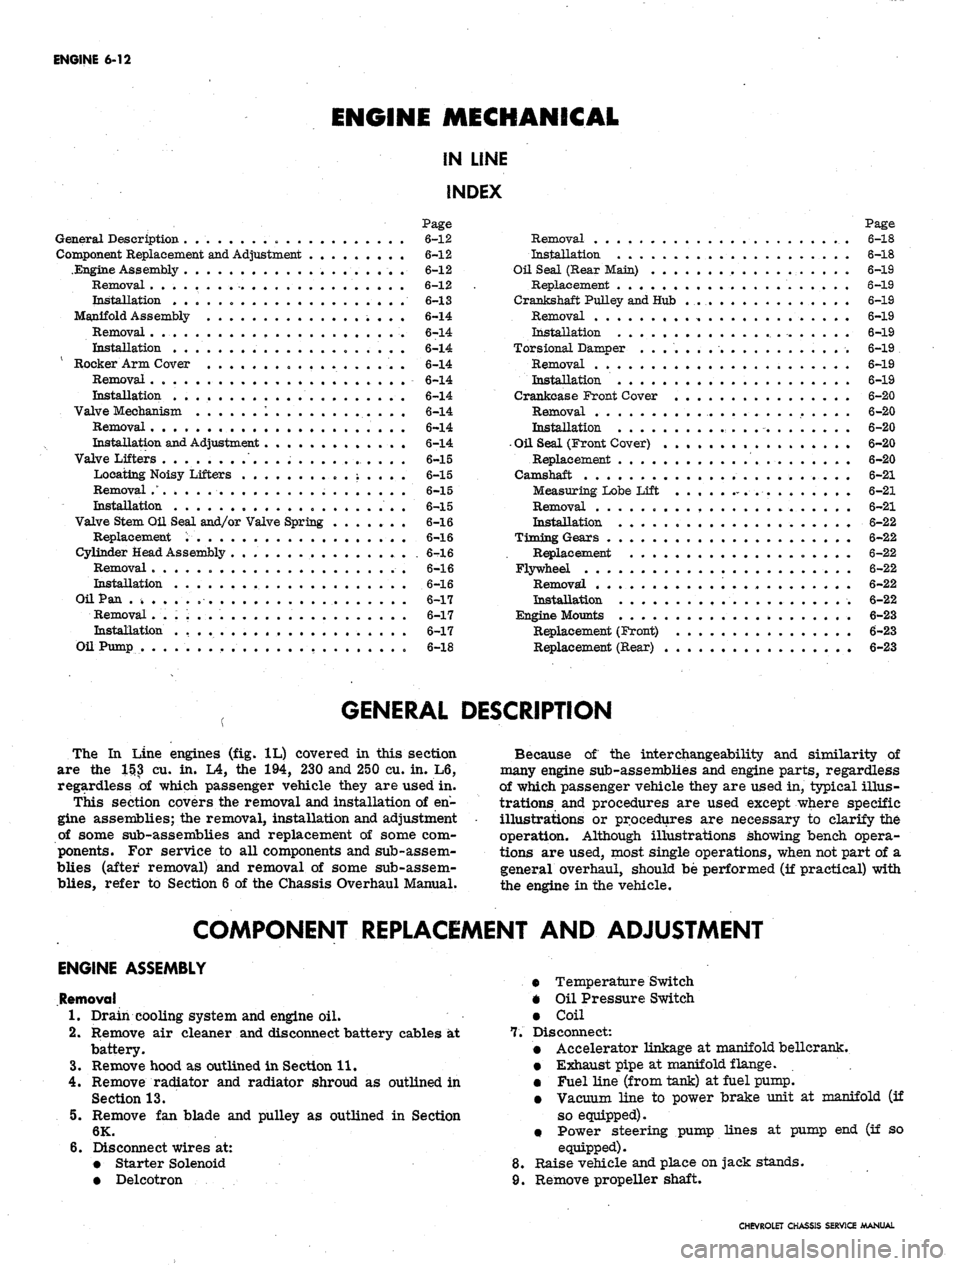 CHEVROLET CAMARO 1967 1.G Chassis Manual PDF 
ENGINE
 6-12

ENGINE
 MECHANICAL

IN LINE

INDEX

Page

General Description . „ 6-12

Component Replacement and Adjustment 6-12

.Engine Assembly 6-12

Removal 6-12

Installation 6-13

Manifold Ass